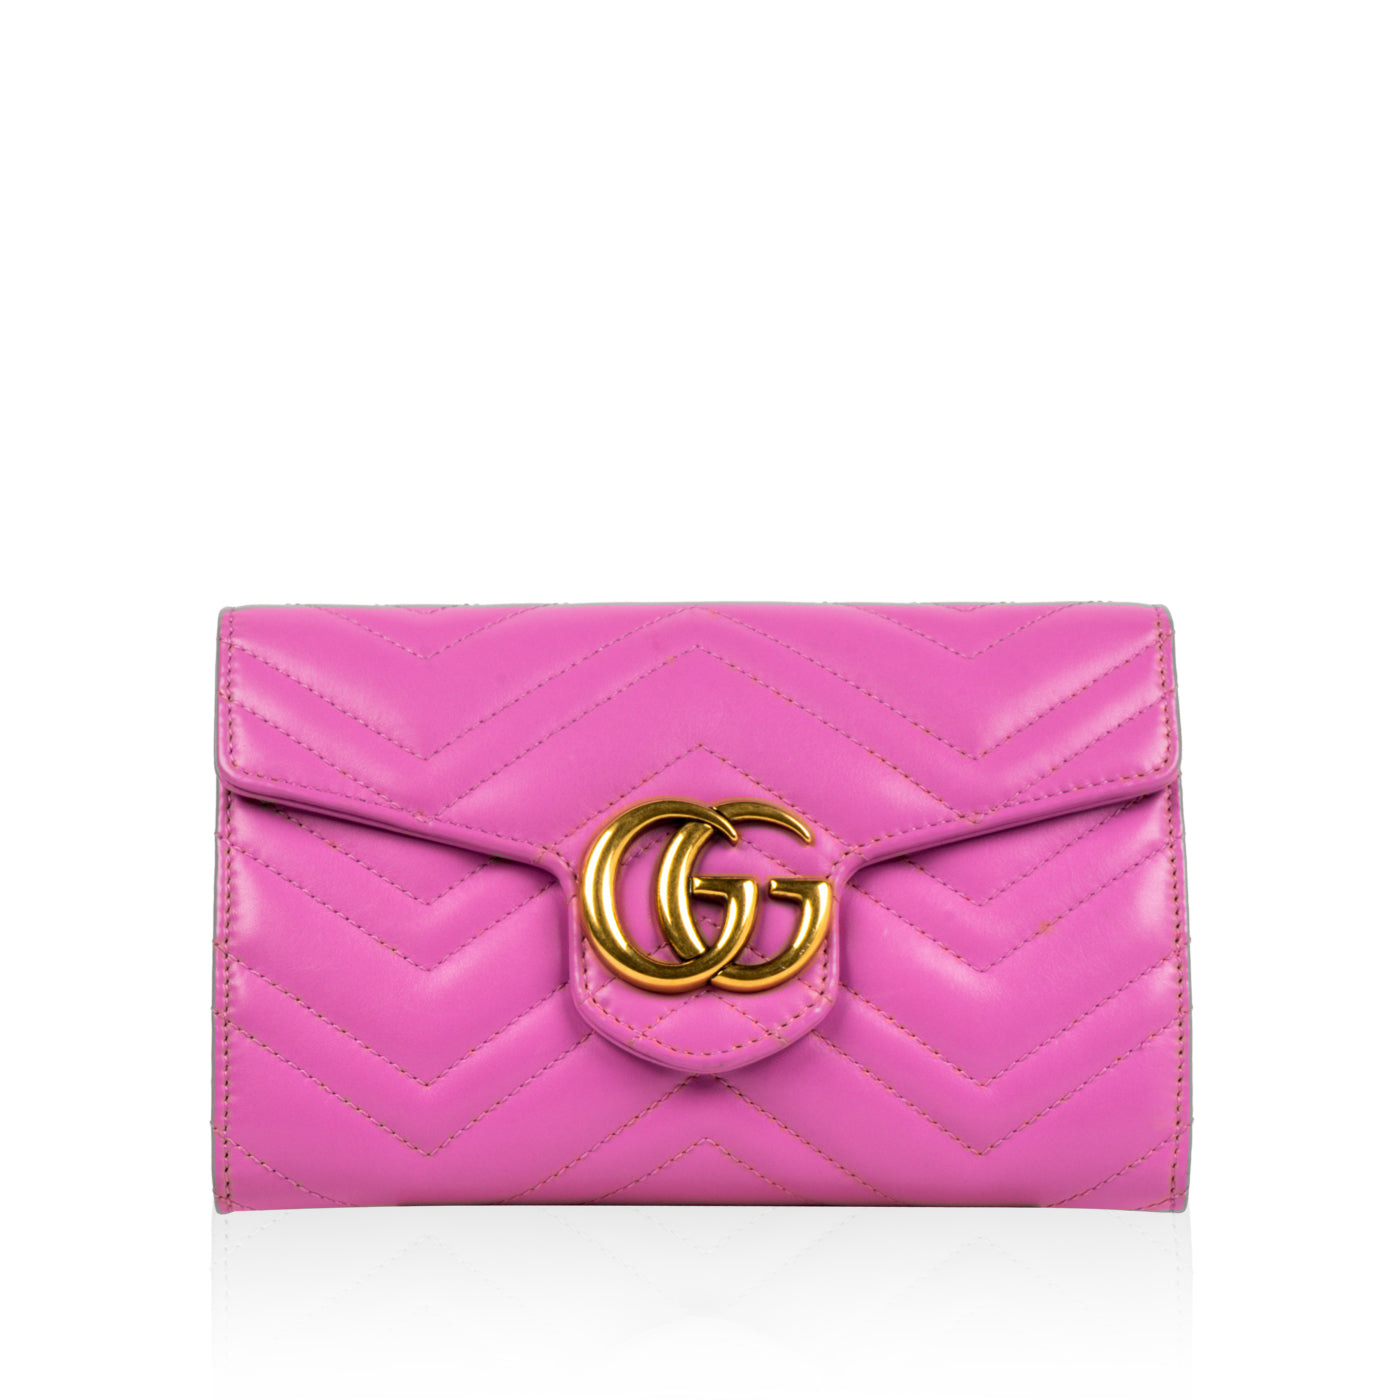 Gucci - Marmont WOC - Pink - Pre-Loved 